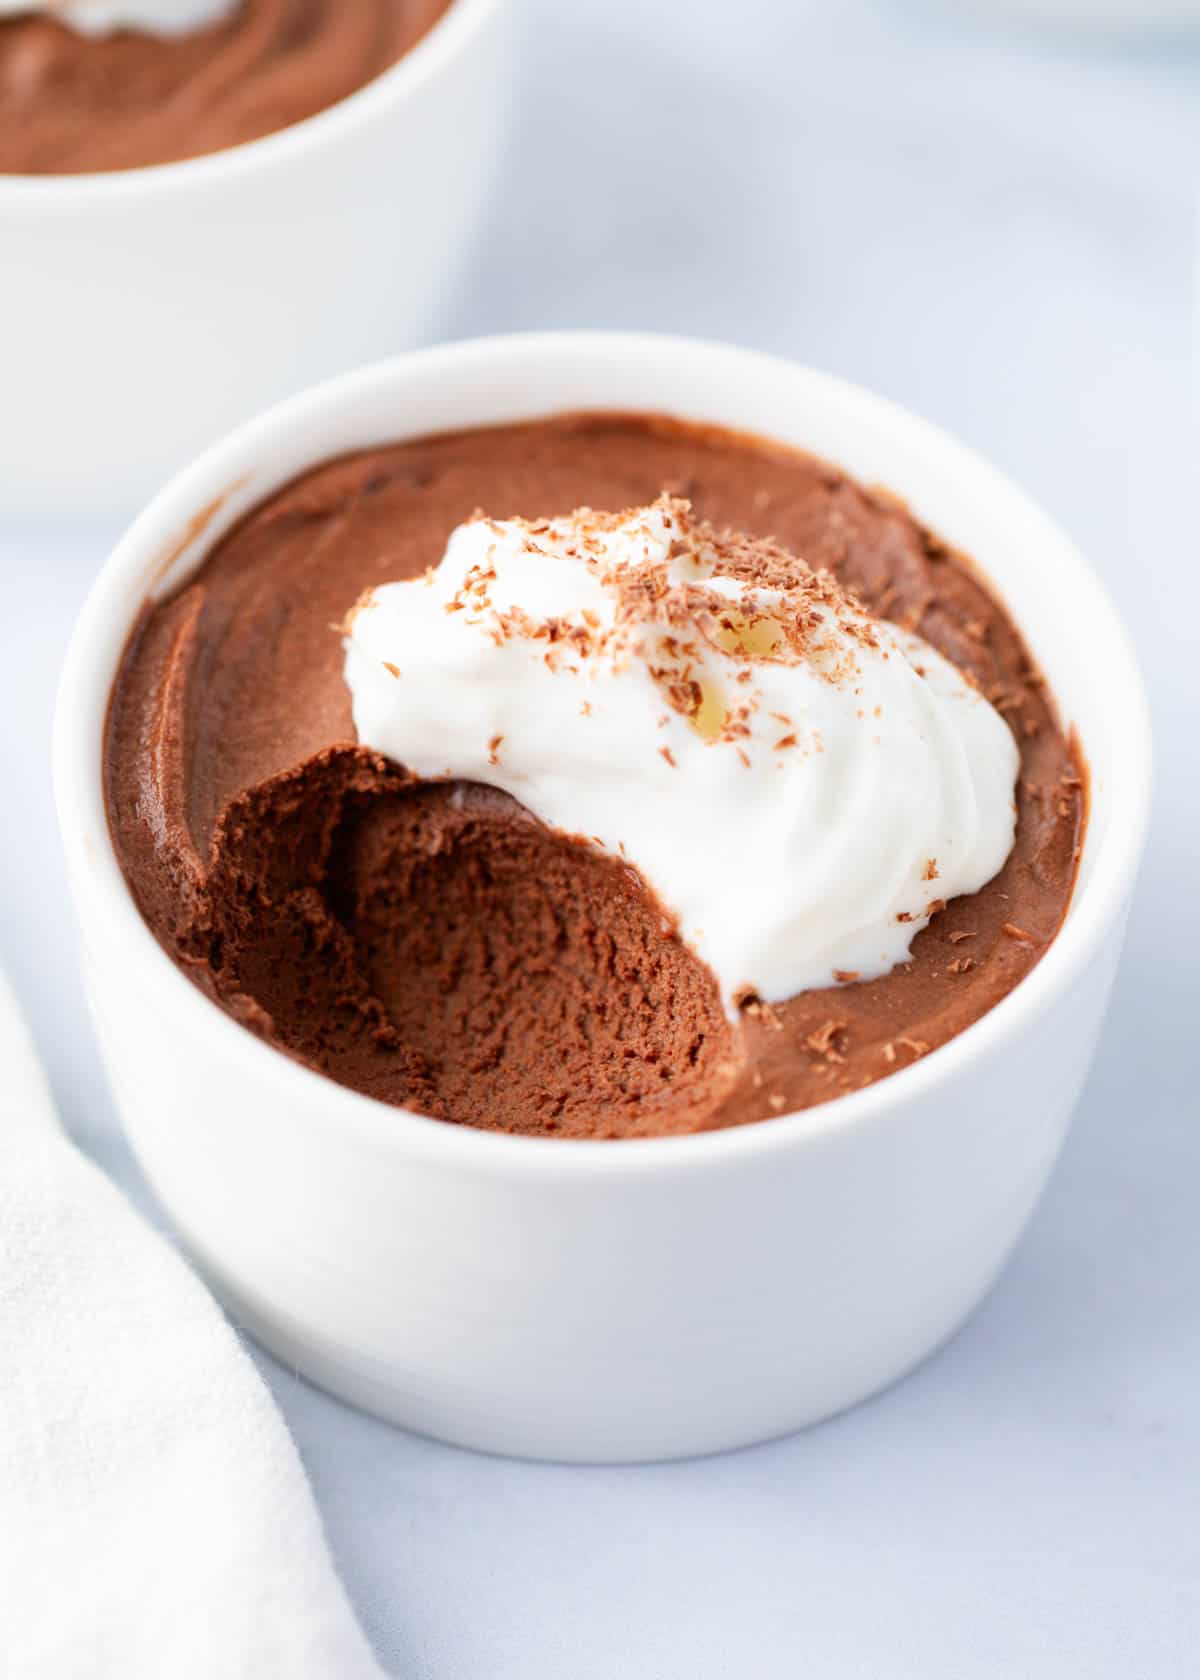 Chocolate mousse in a white bowl.